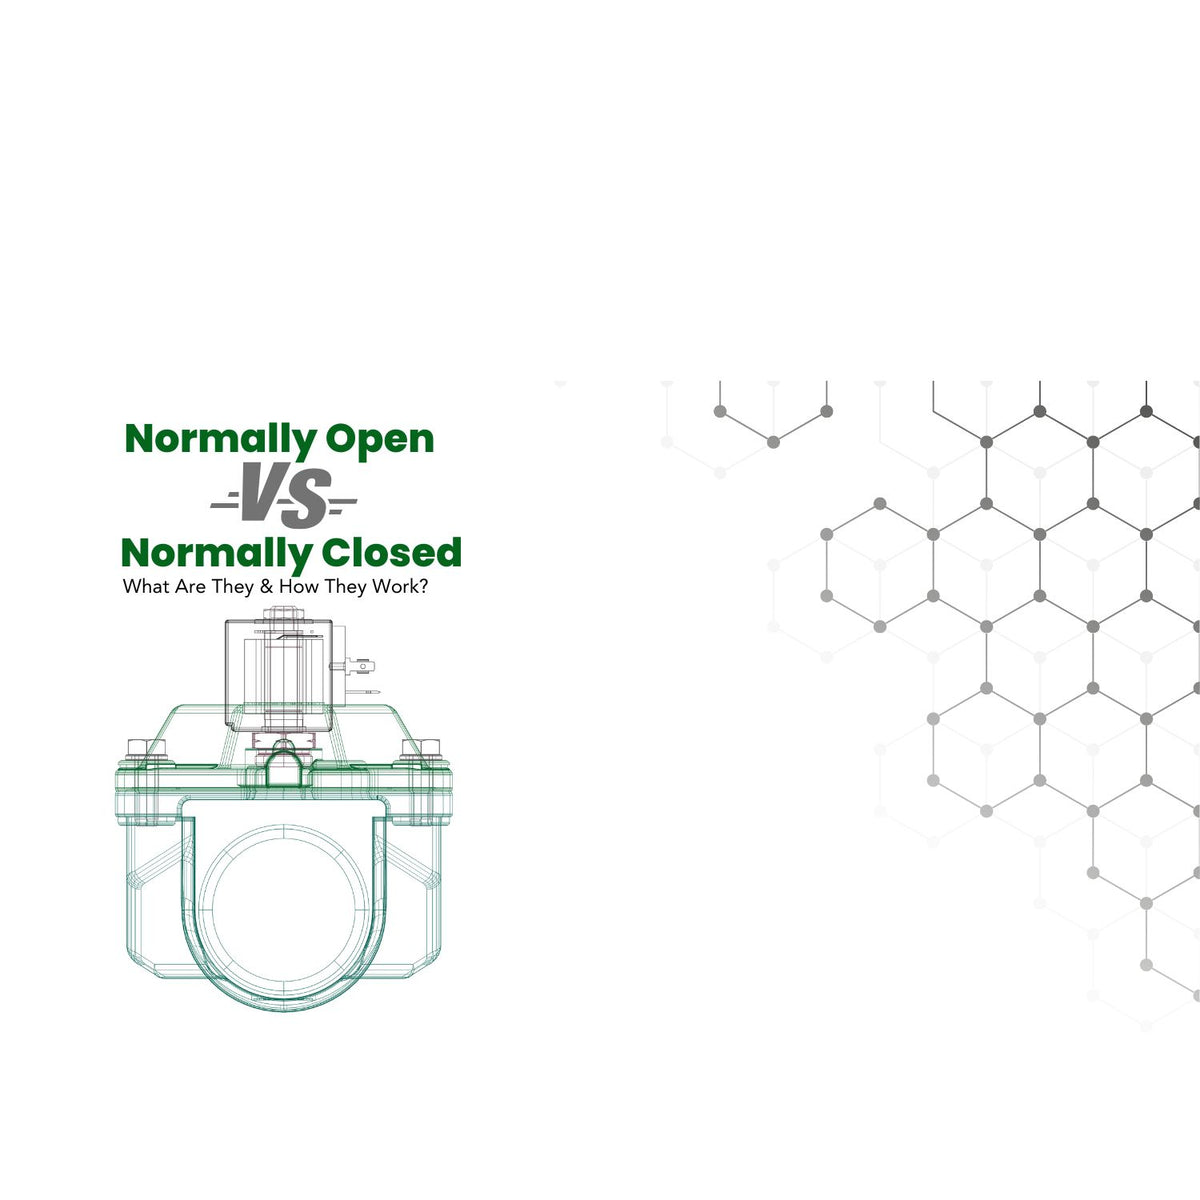 What Are The Differences Between Normally Closed and Normally Open